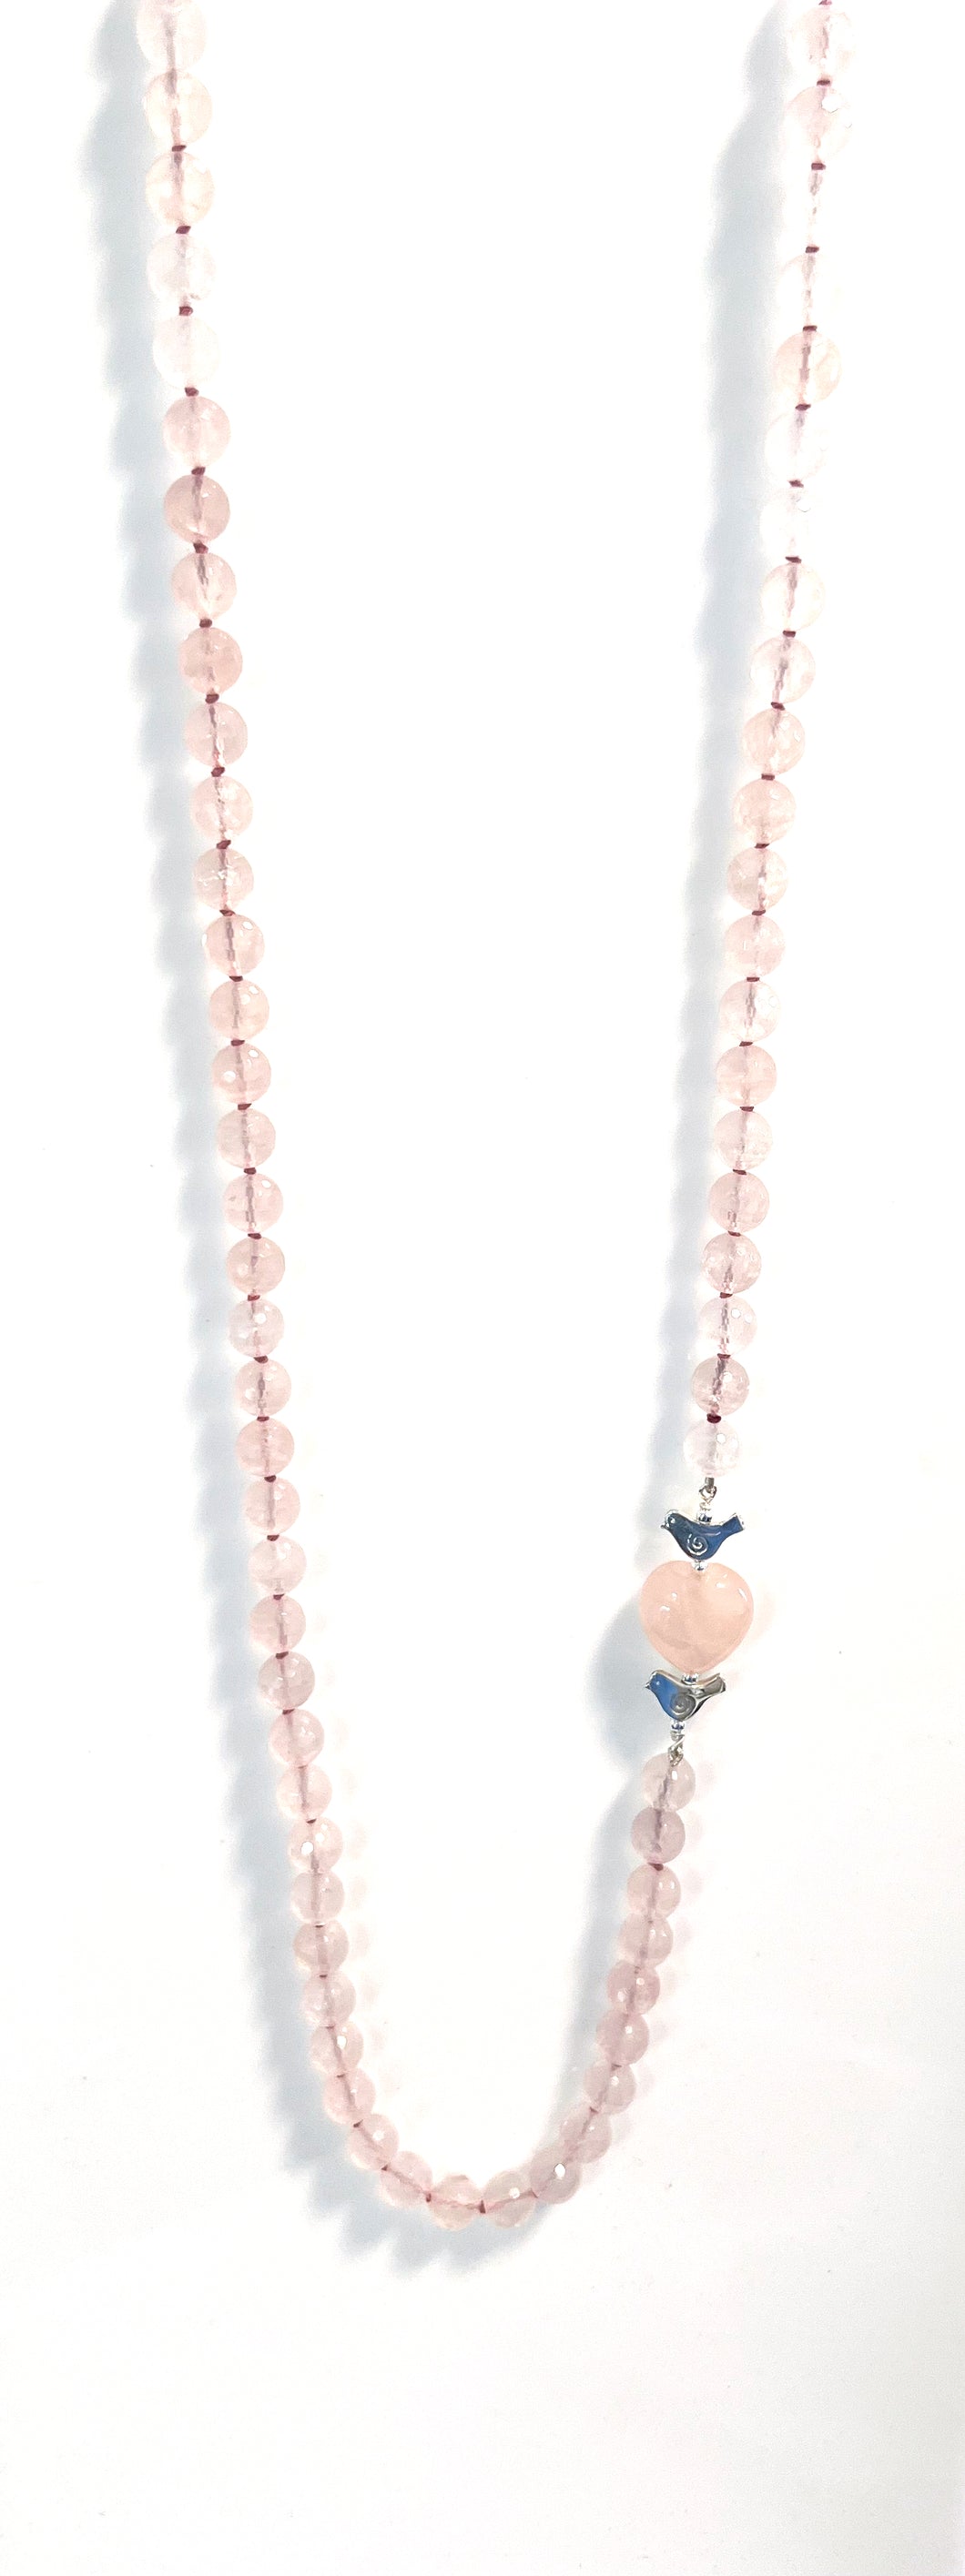 Australian Handmade Pink Necklace with Facetted Rose Quartz Rose Quartz Heart and Sterling Silver Birds